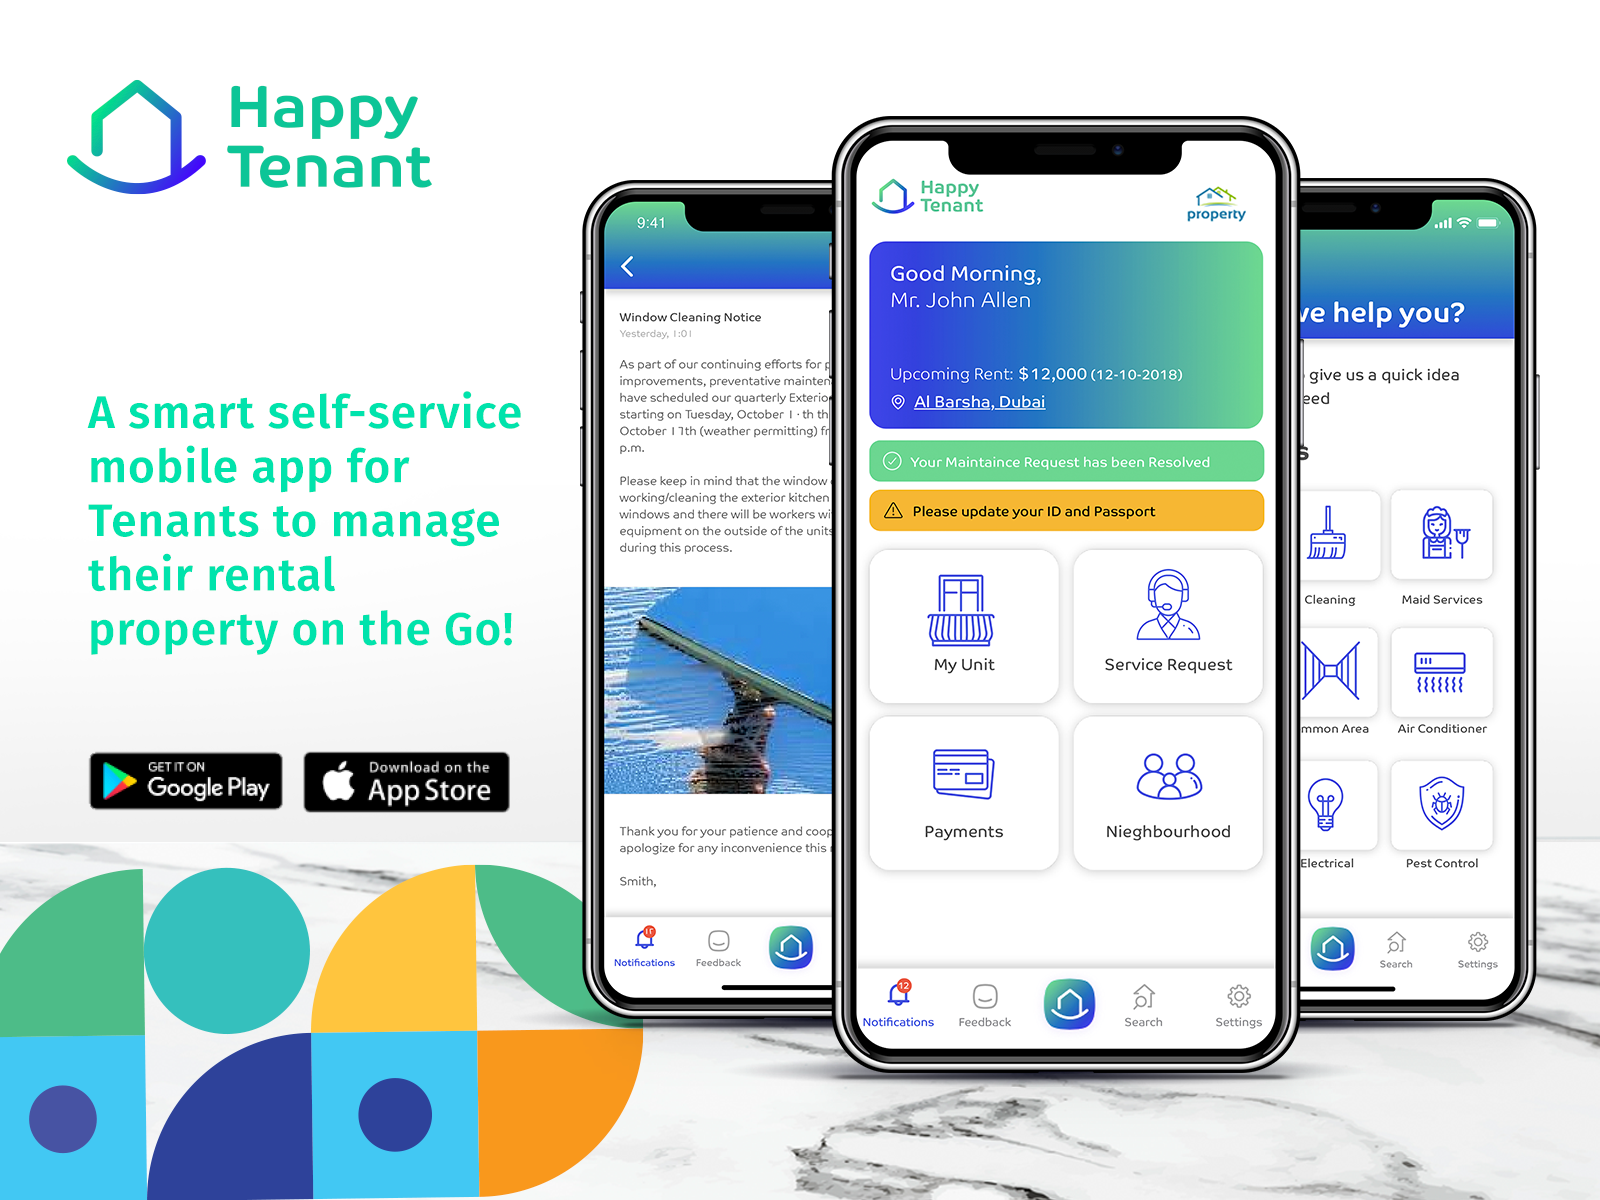 HappyTenant - mobile app for tenants that meets the needs and demands of the modern tenant. Bring transparency, efficiency and joy to the tenancy and property management experience!